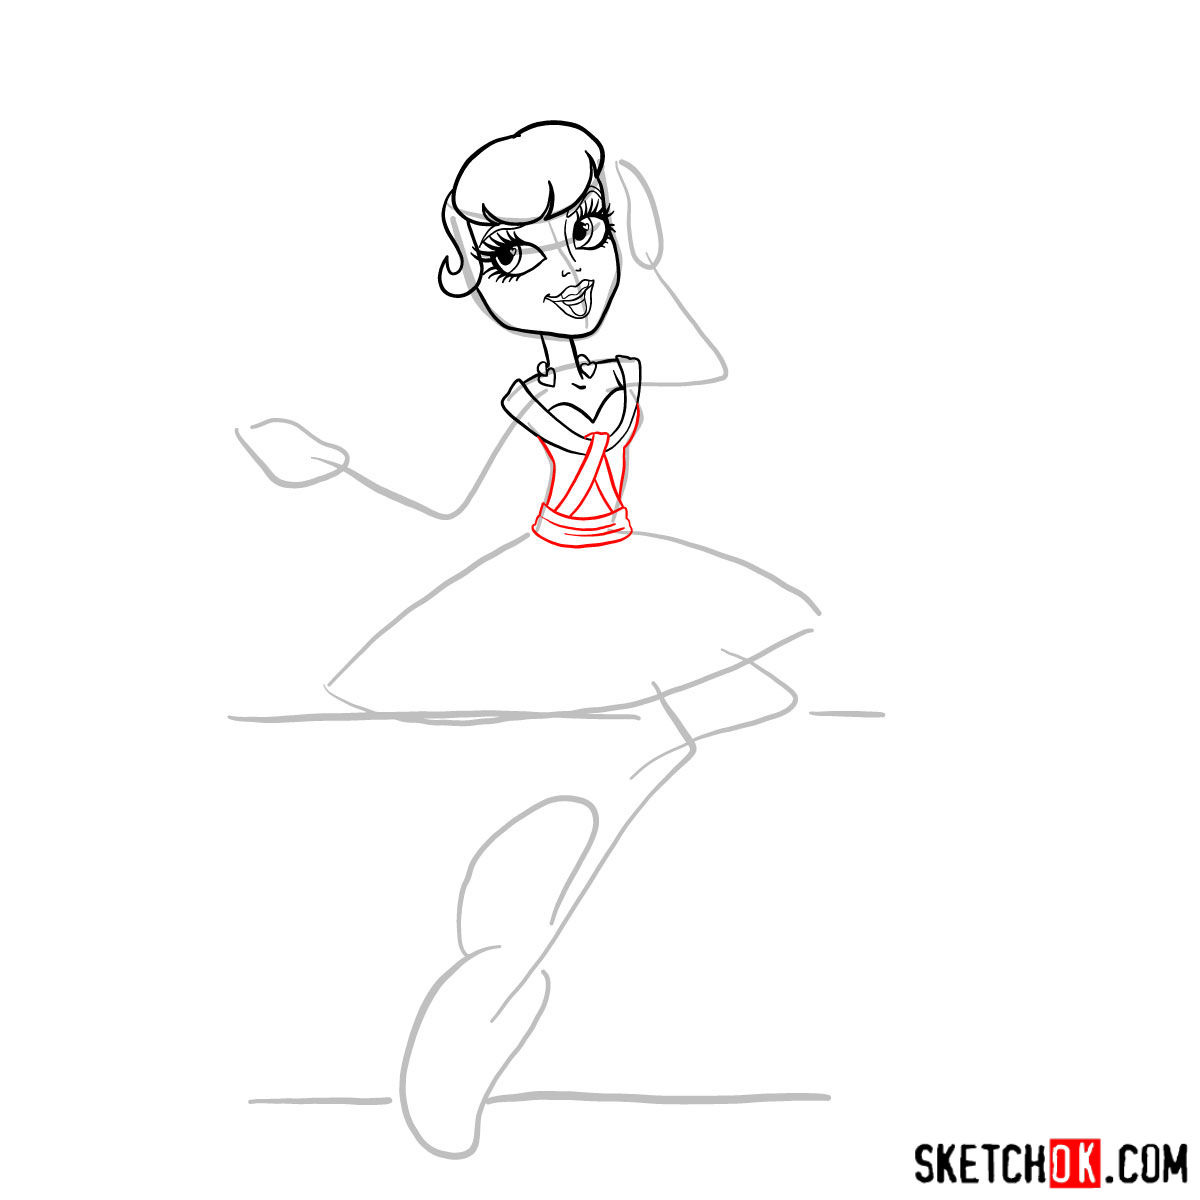 How to draw C.A. Cupid step by step - step 06